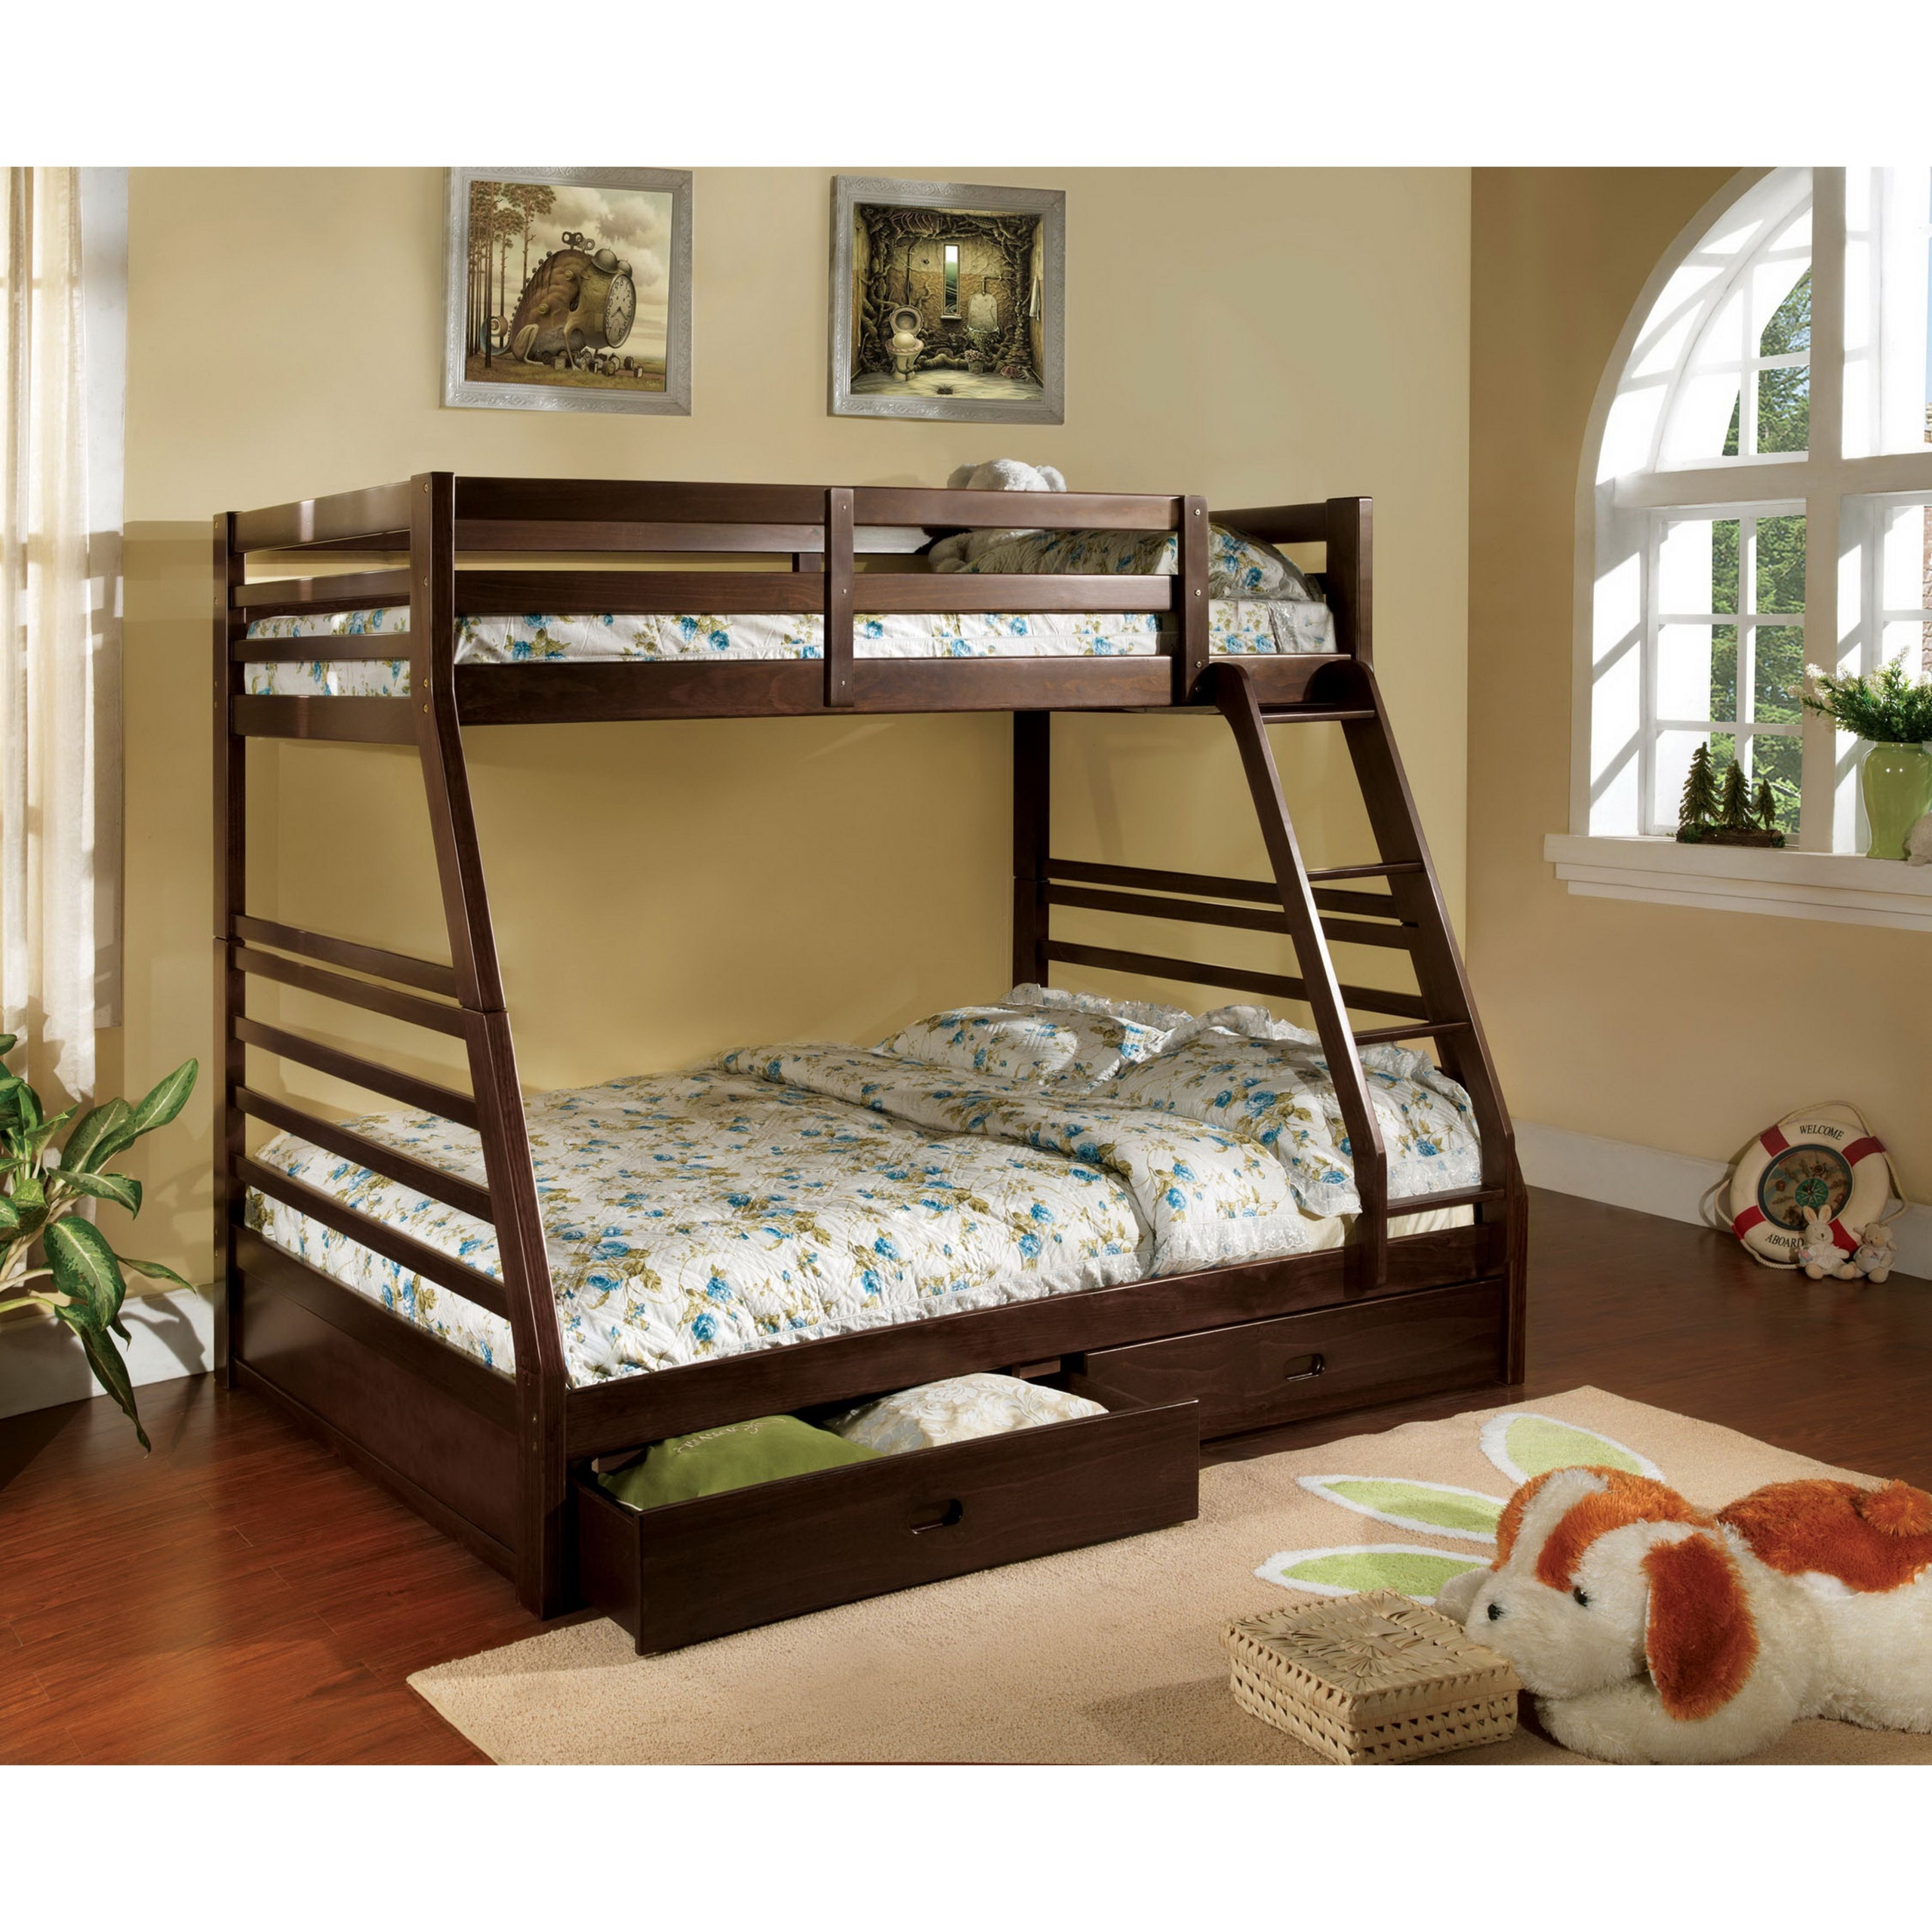 Furniture of America Furniture of America Redden Twin over Full Bunk Bed with Storage Drawers